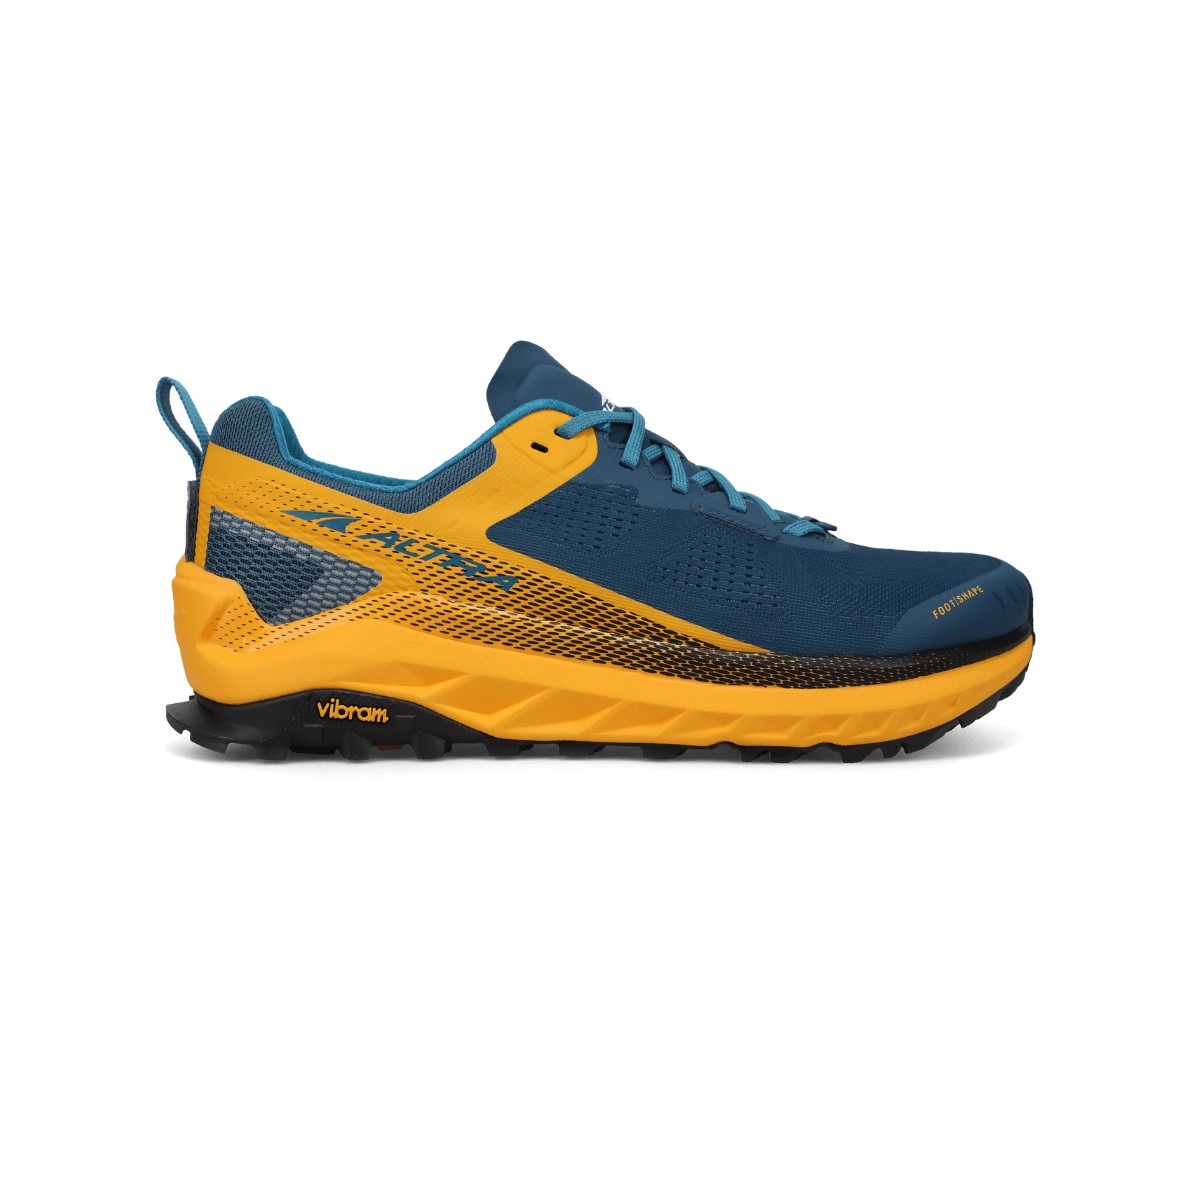 Chaussures Altra Olympus 4 Bleu Jaune AW21, Taille 42 - EUR